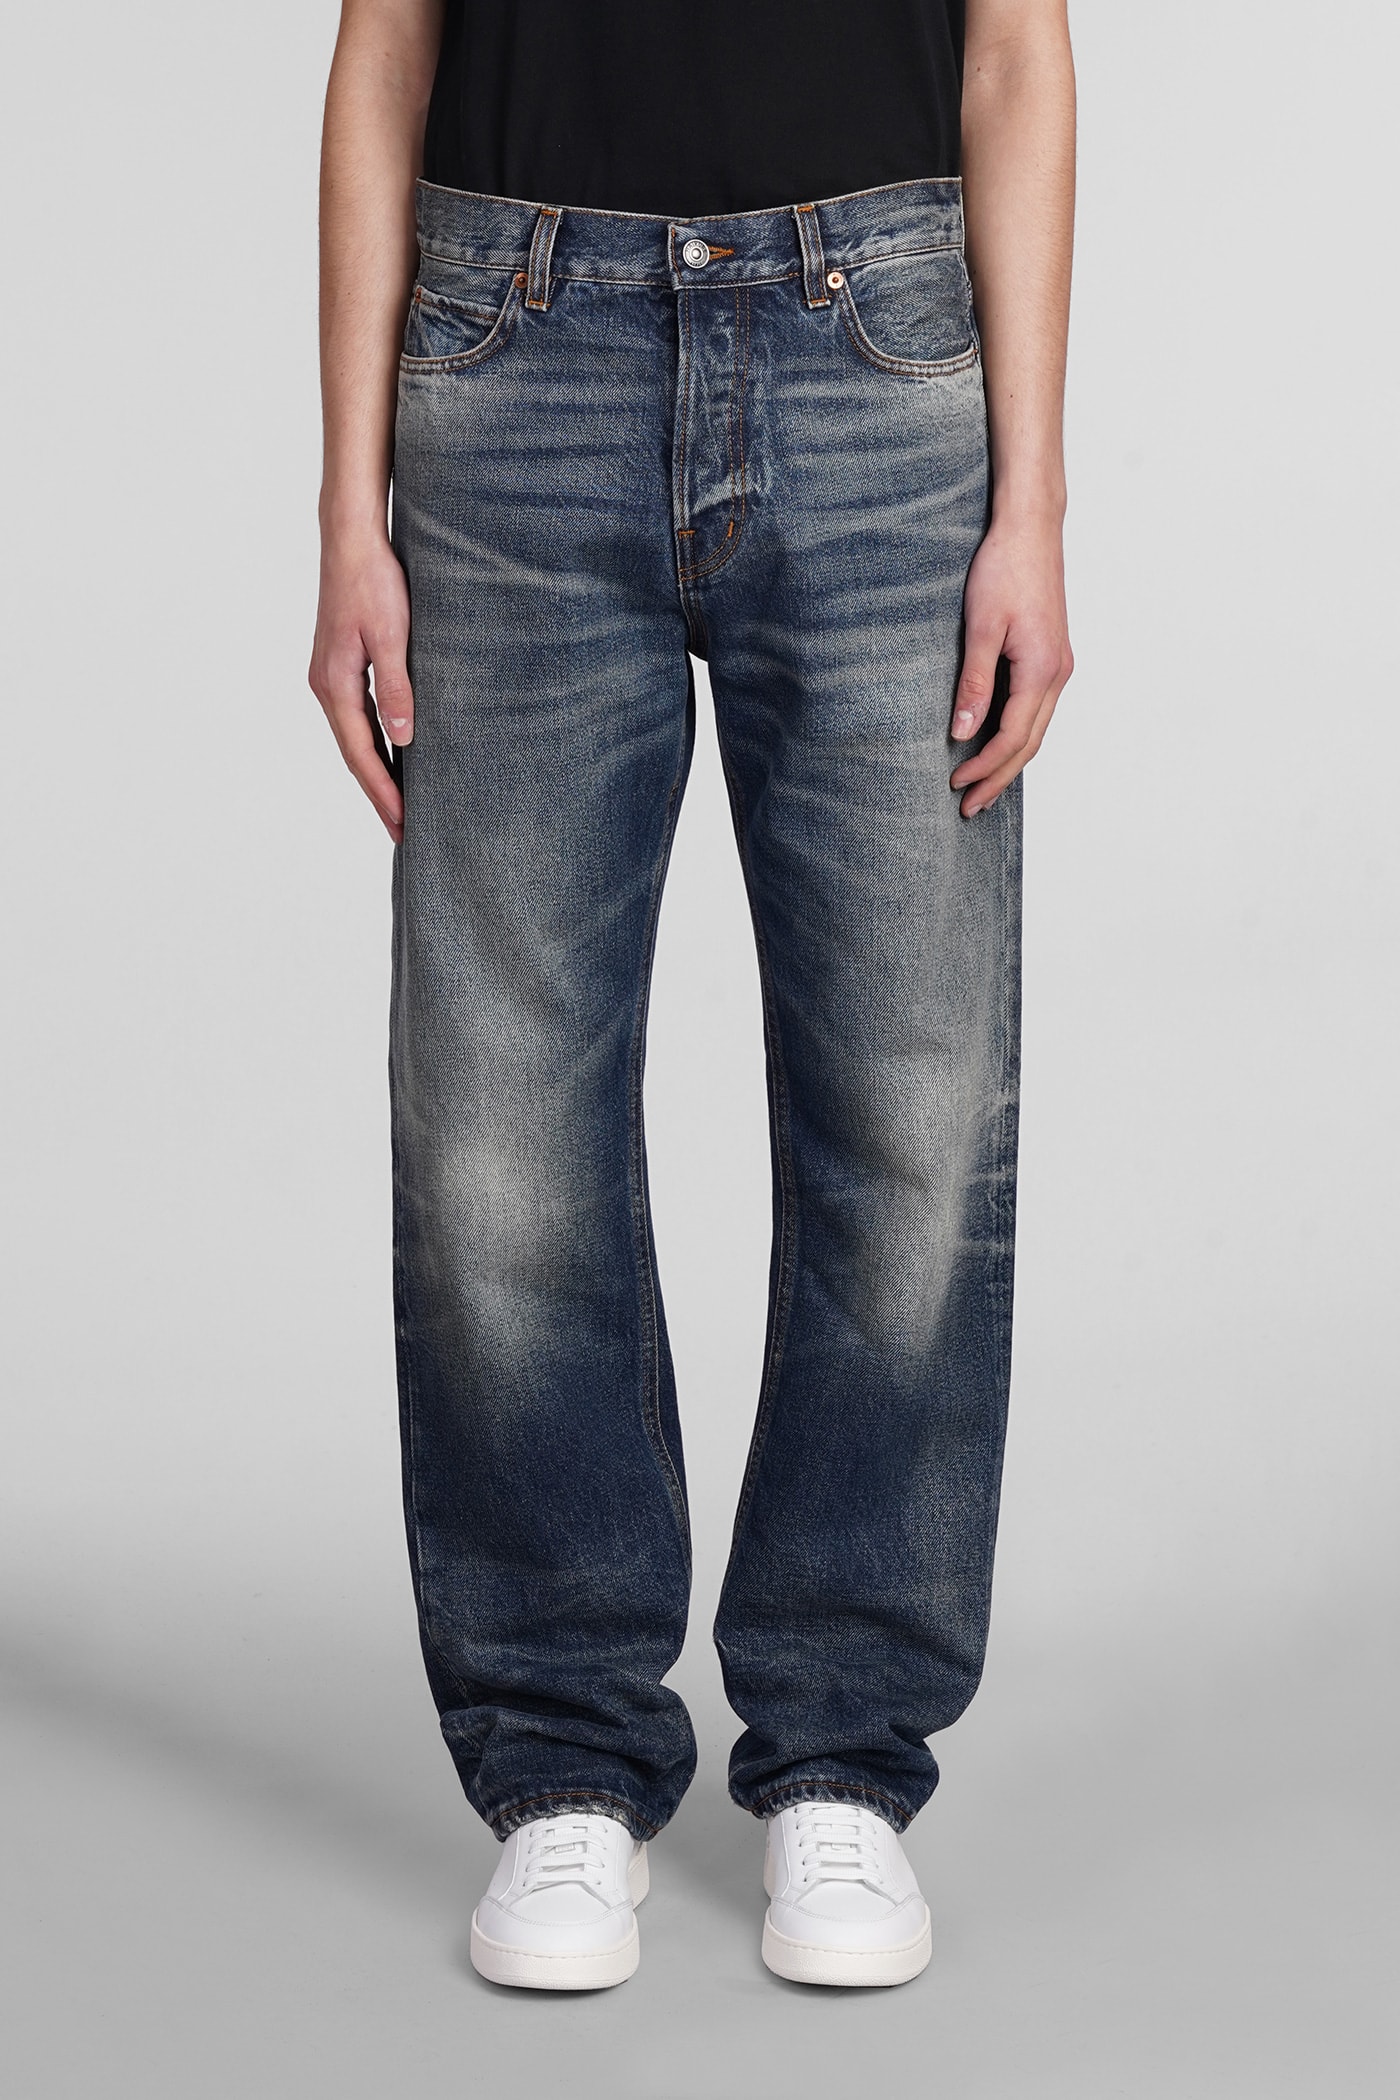 Blake Jeans In Blue Cotton